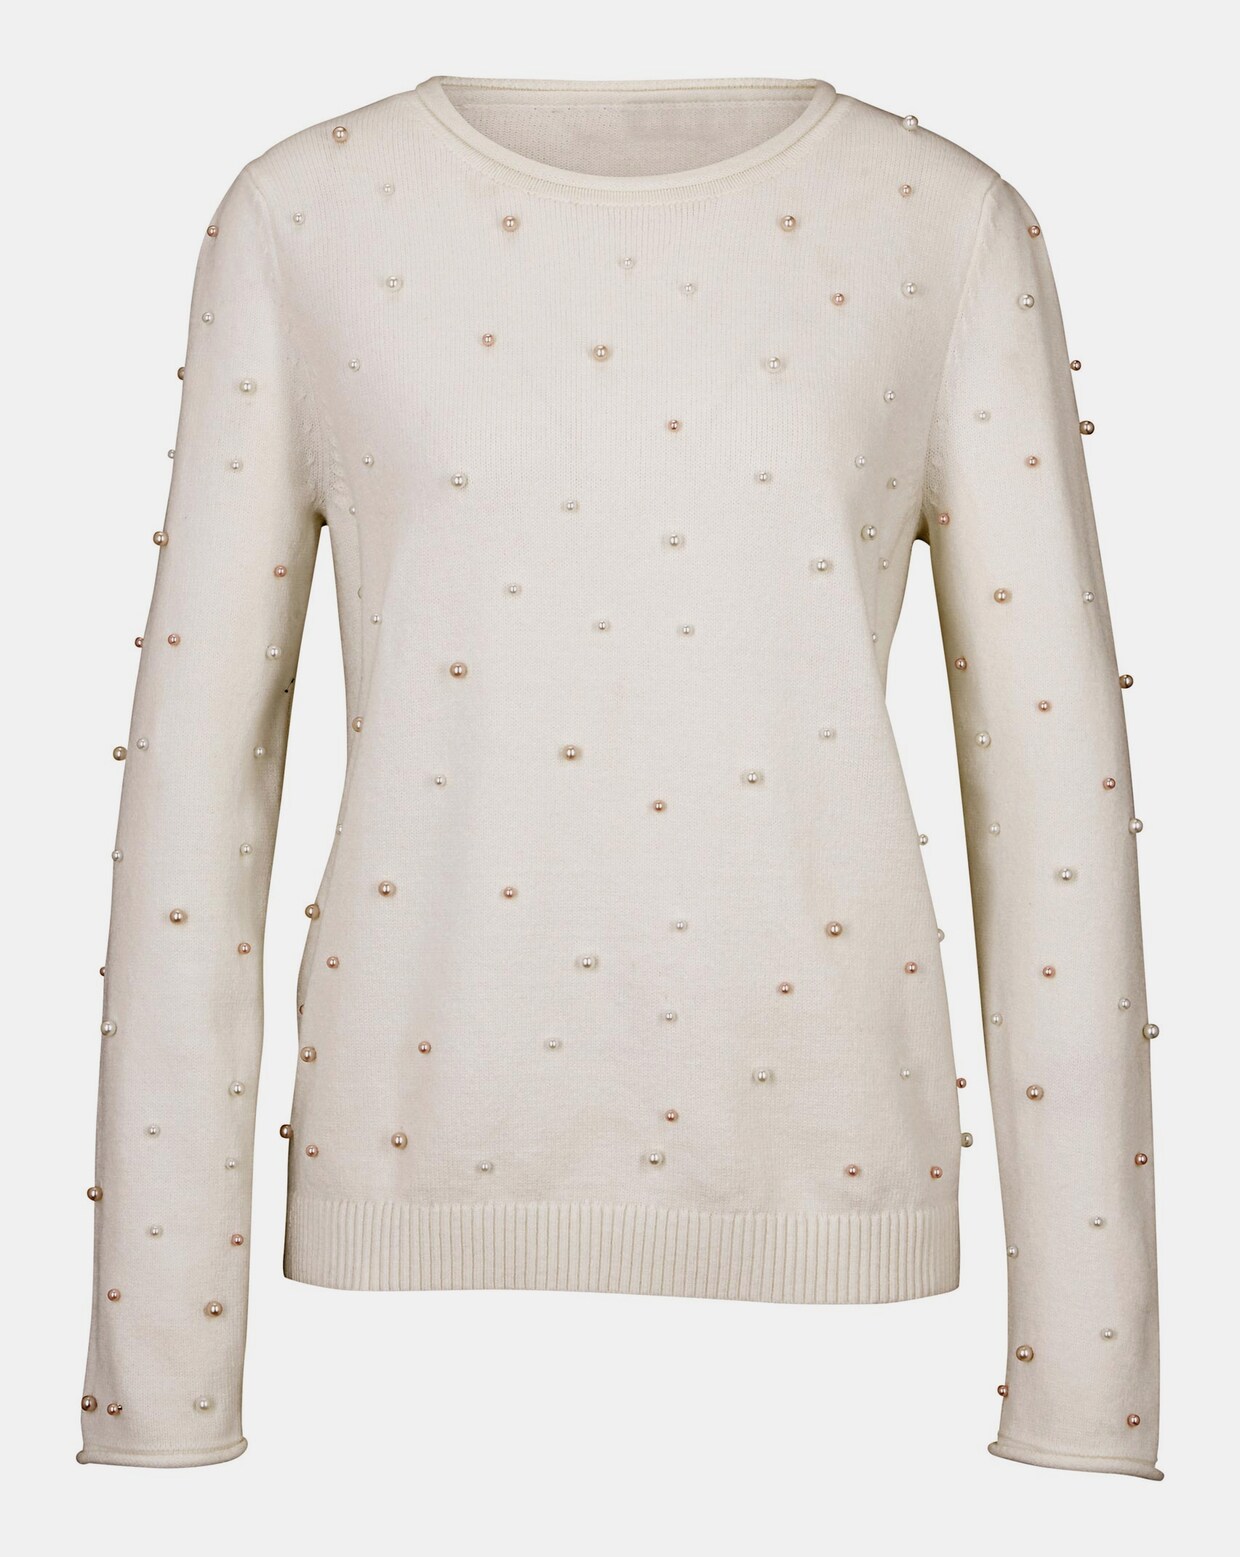 Ashley Brooke Pullover - offwhite